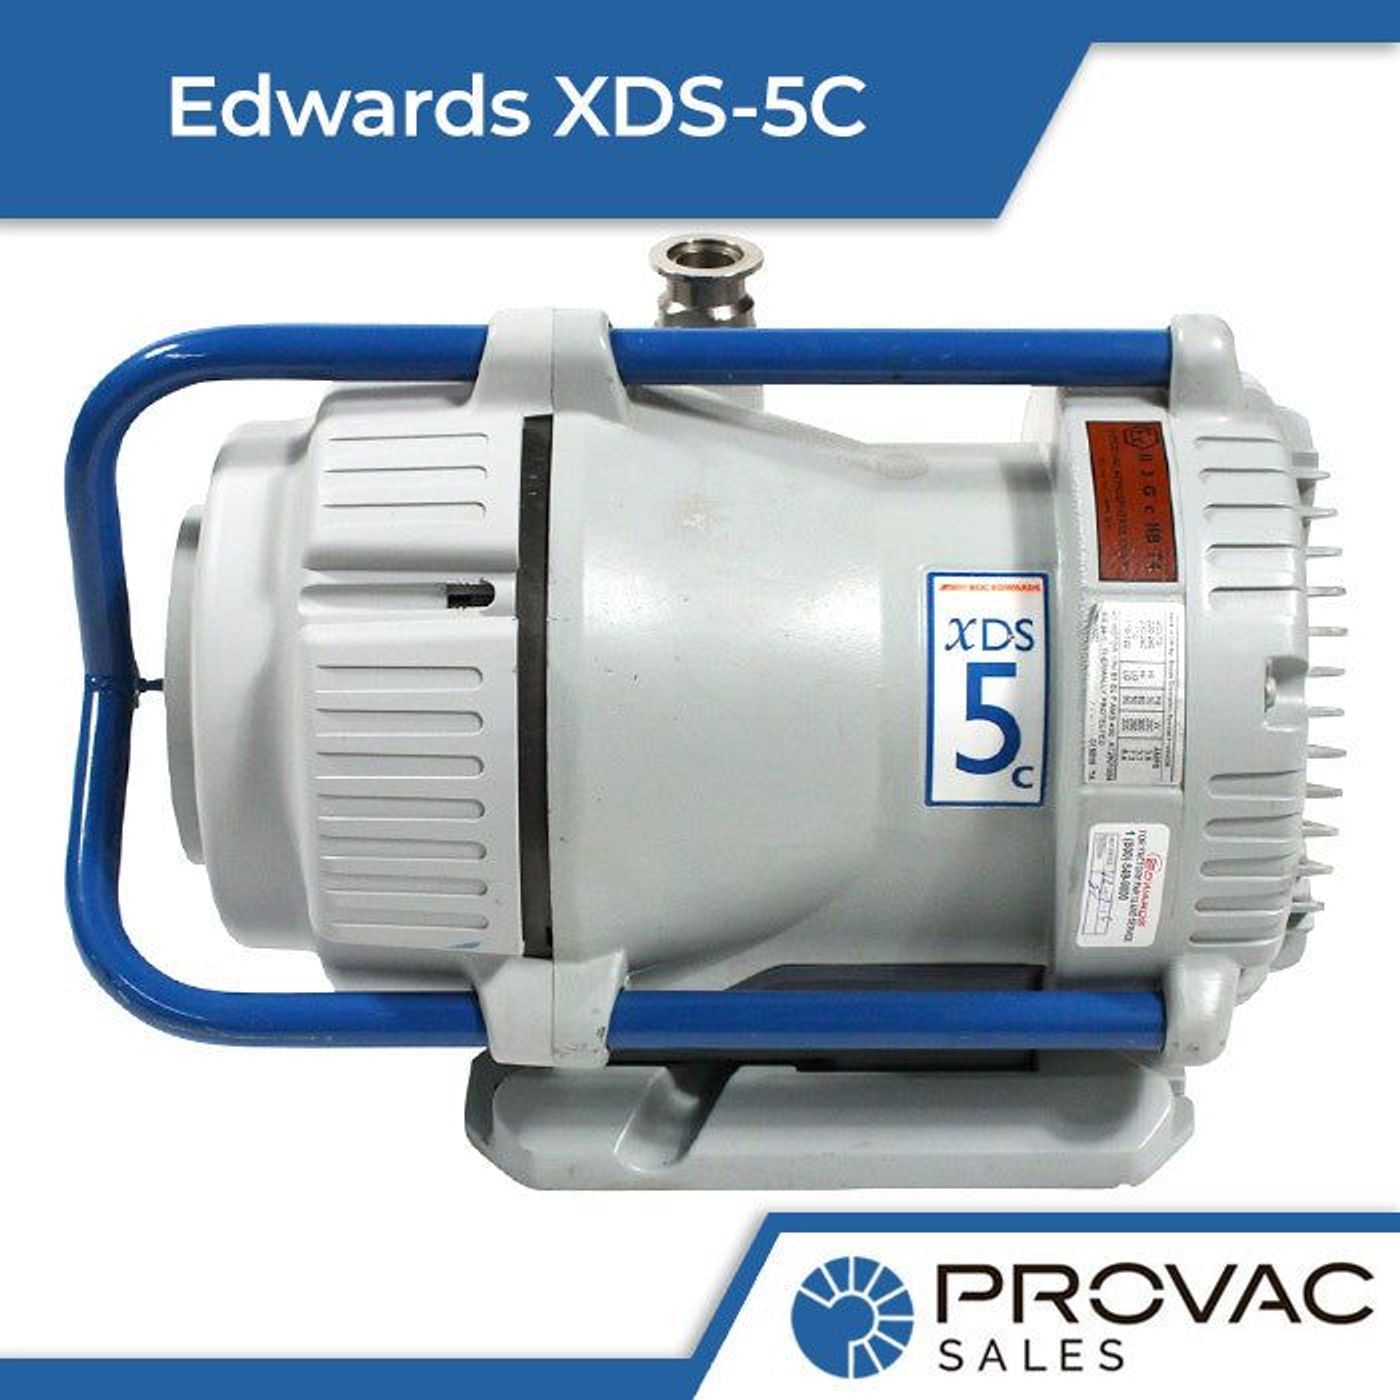 Edwards XDS-5C Scroll Pump: In Stock, Ready to Ship